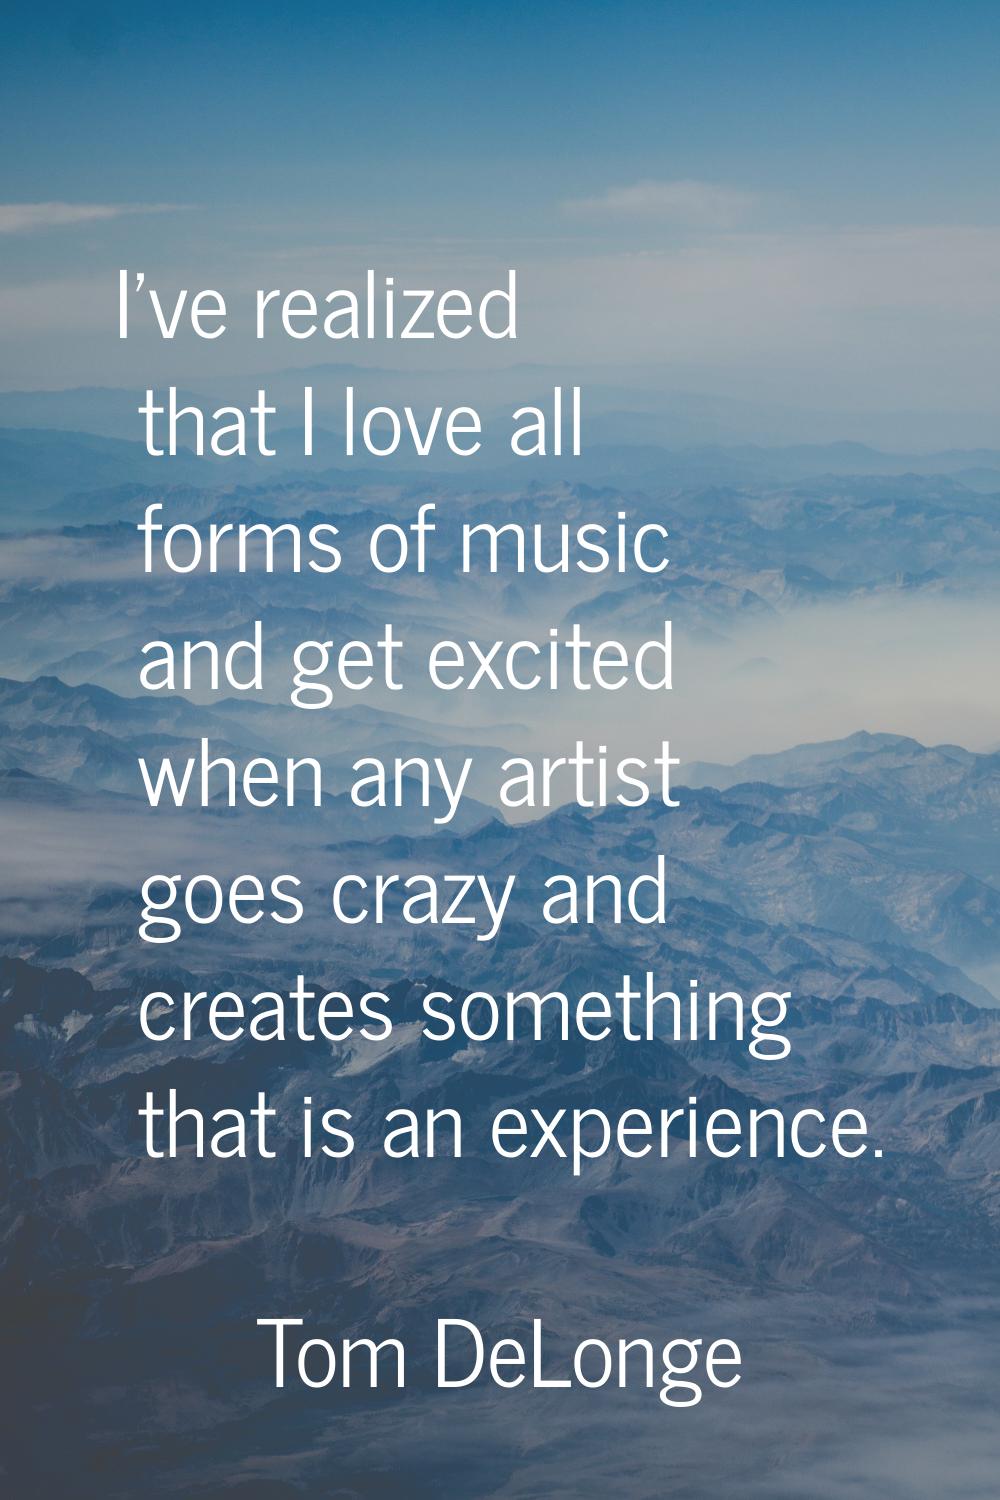 I've realized that I love all forms of music and get excited when any artist goes crazy and creates